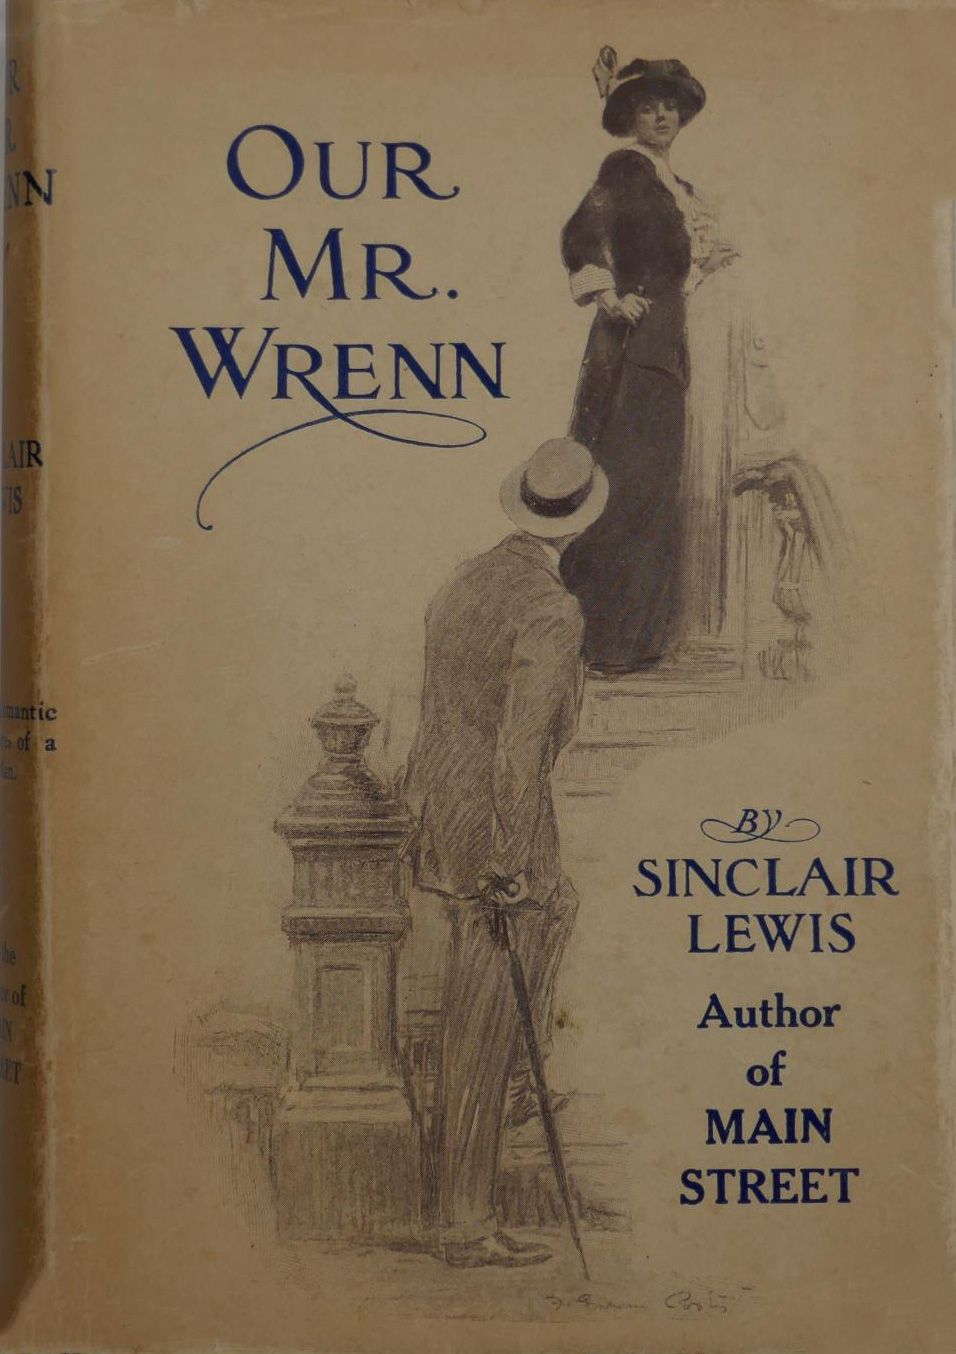 The Project Gutenberg eBook of Our Mr. Wrenn, by Sinclair Lewis